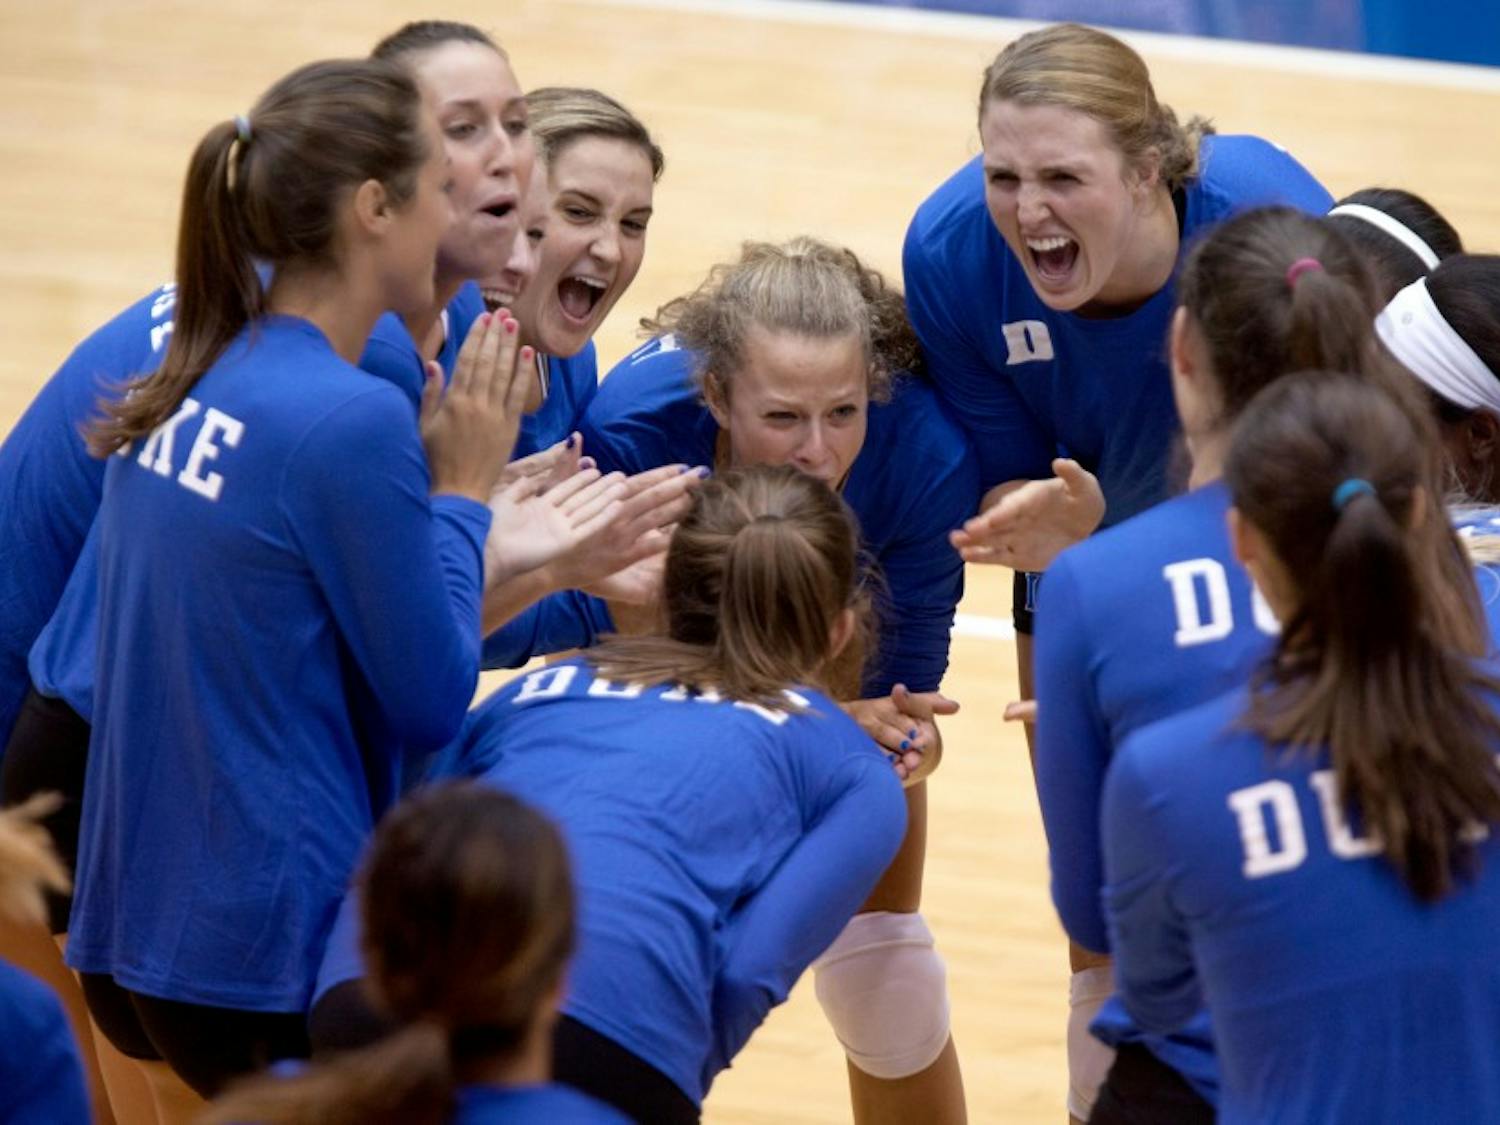 Head coach Jolene Nagel said that Duke will need to cut down on its errors if it hopes to have a successful season.